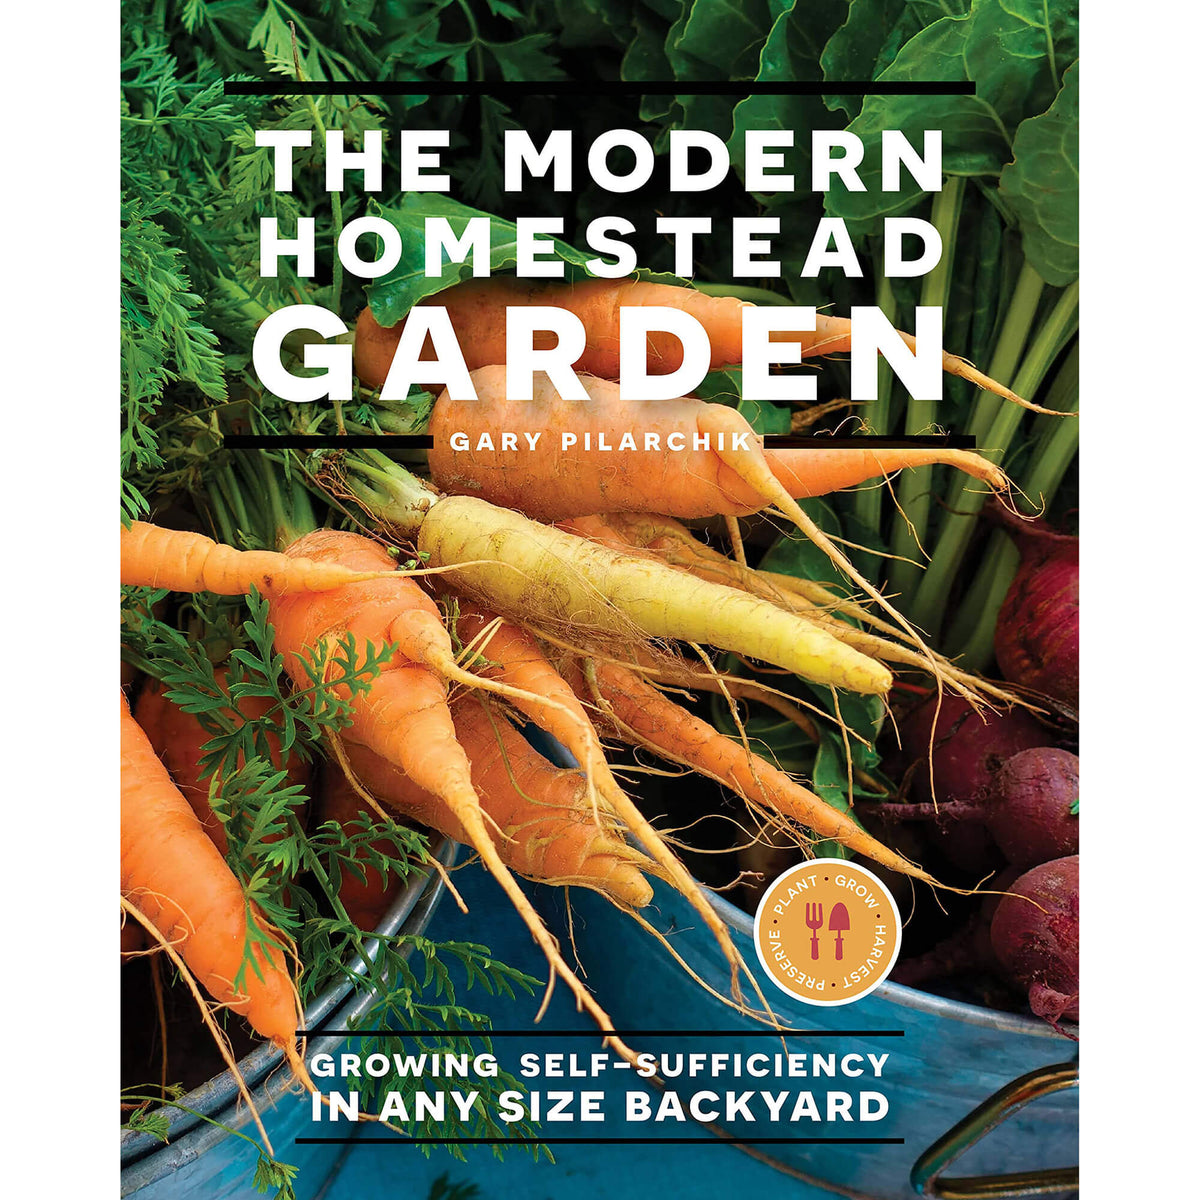 The Modern Homestead Garden: Growing Self-sufficiency in Any Size Backyard front cover.